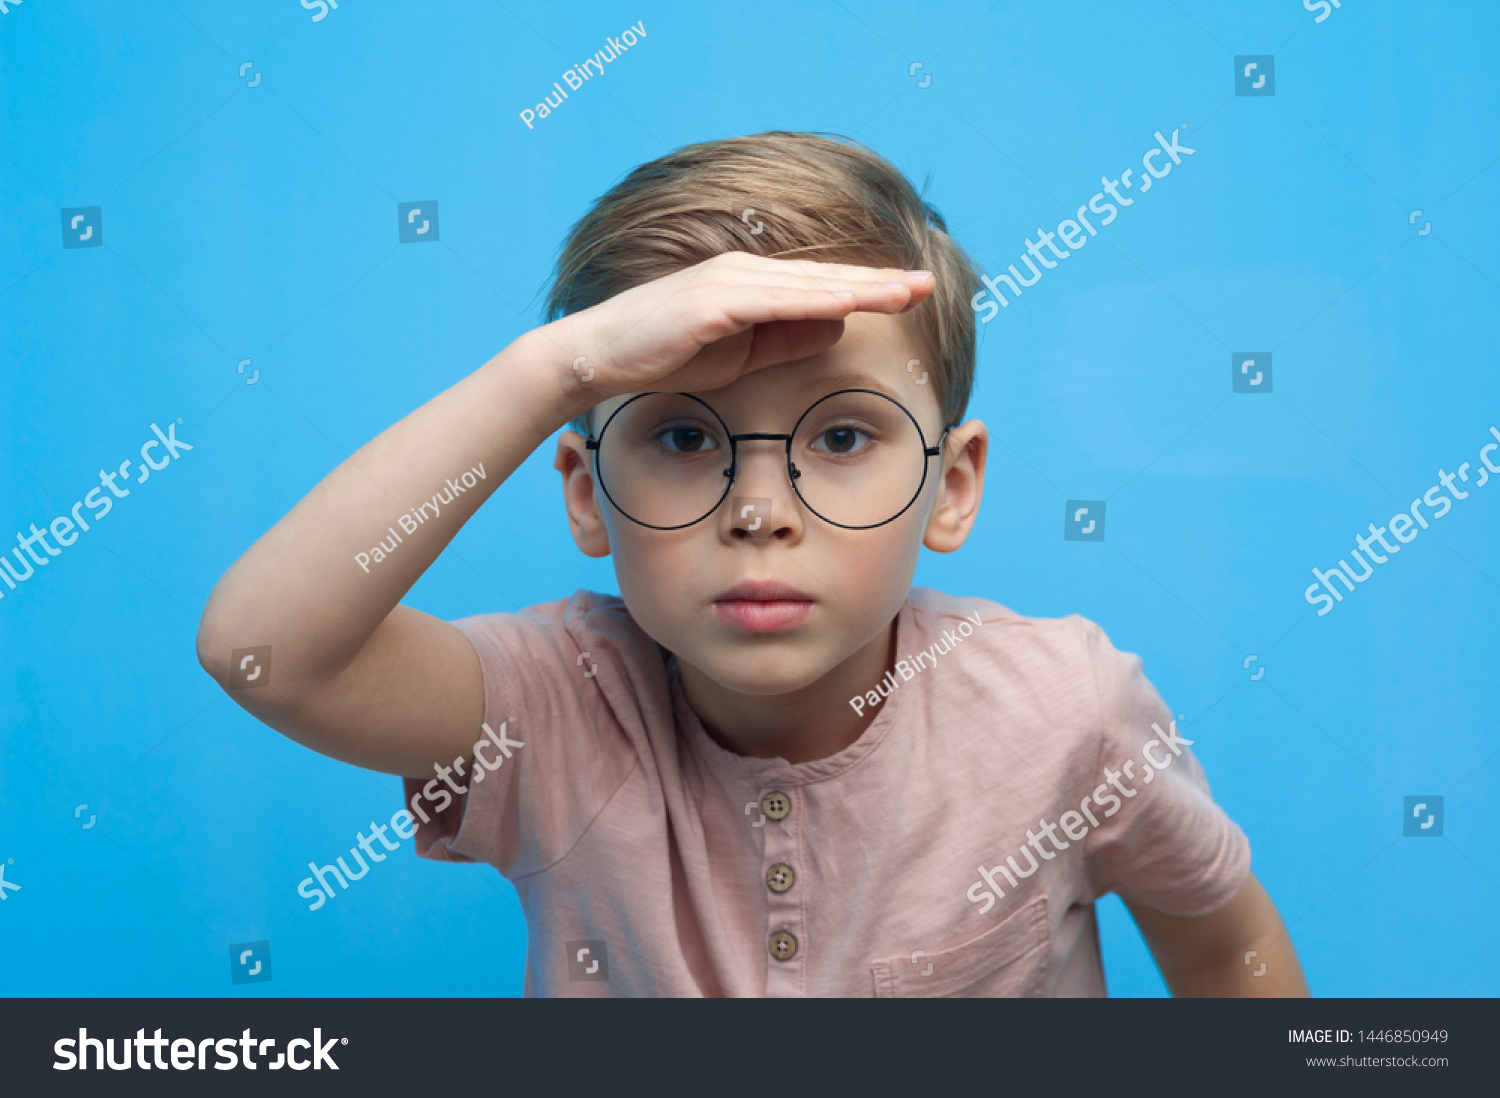 Cute Blonde Boy with Glasses - wide 4